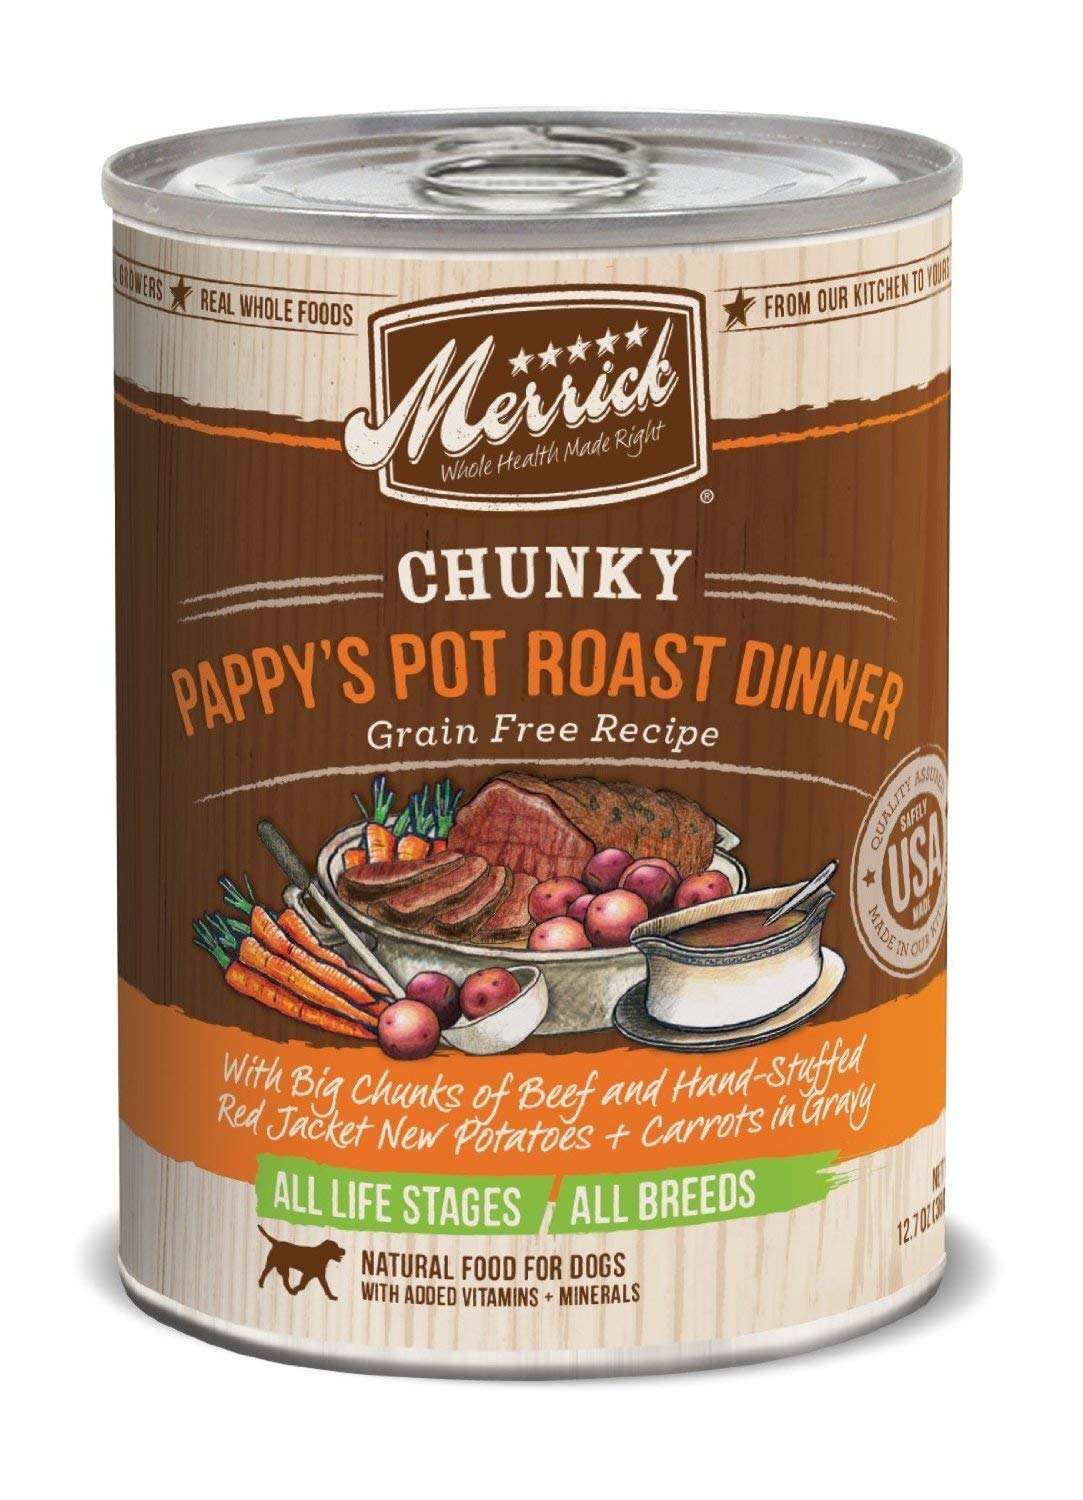 Merrick Chunky Canned Dog Food Variety Pack - 3 Flavors (12 Pack)